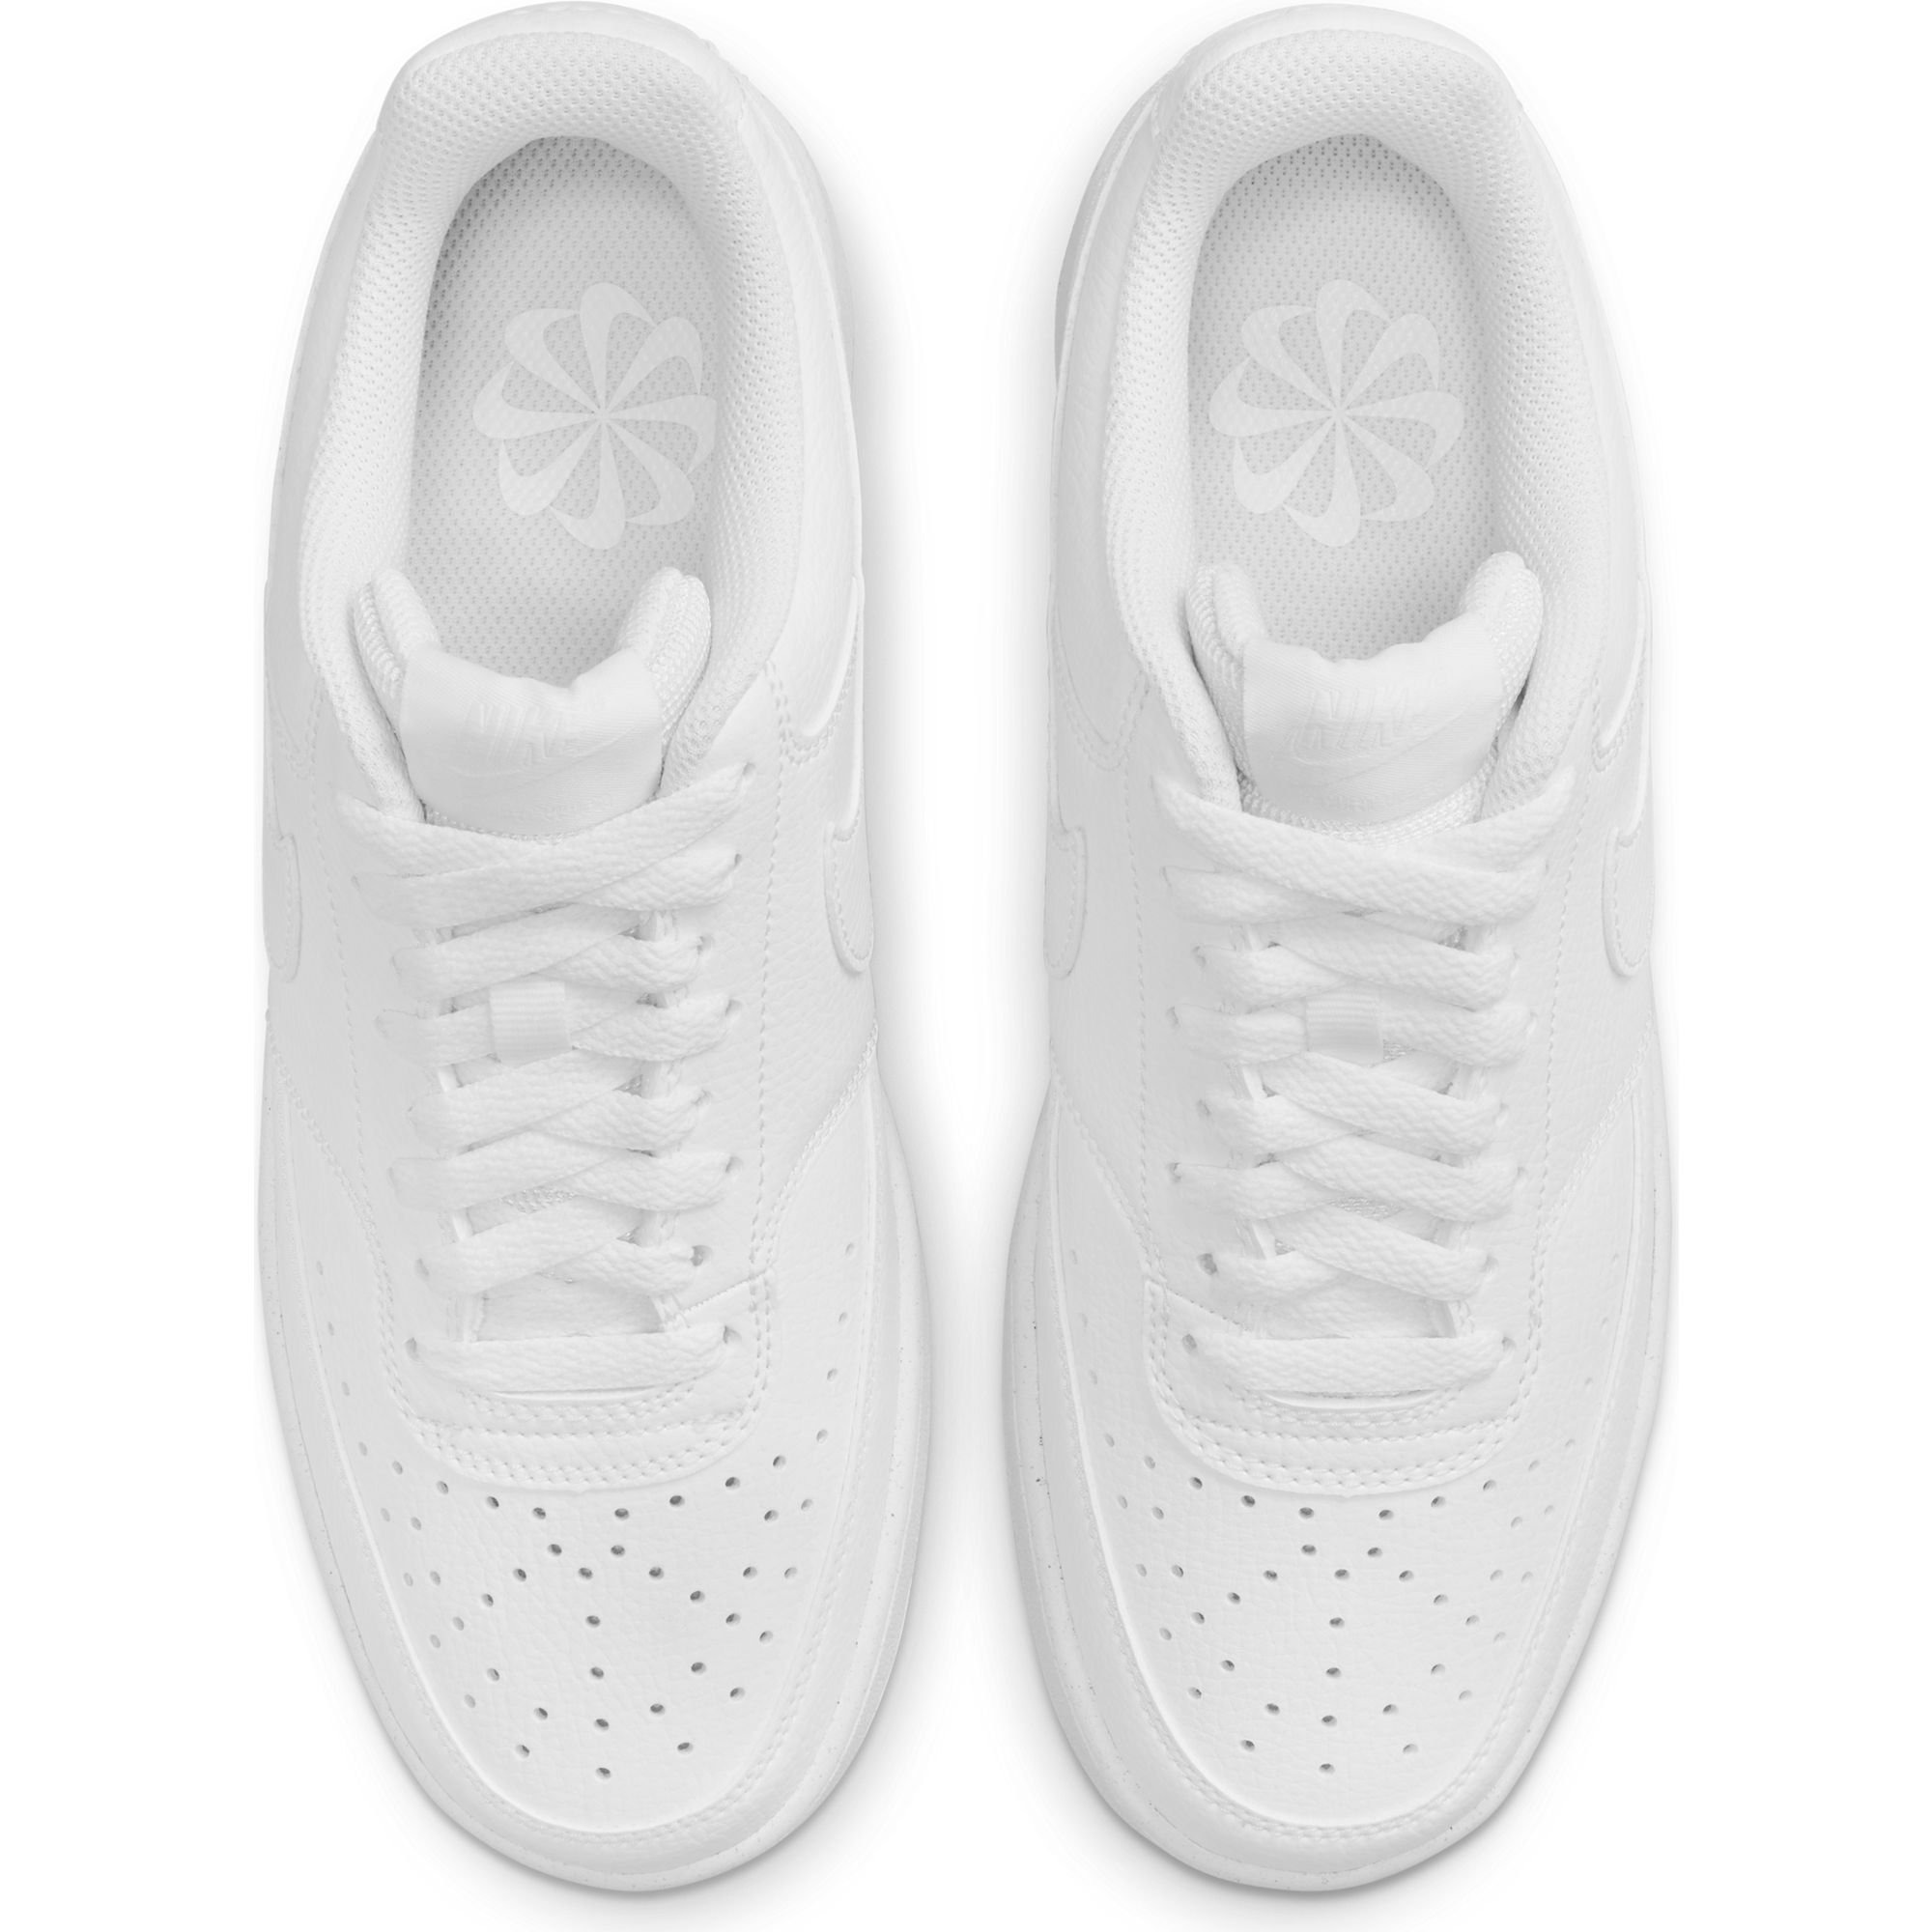 Court vision low next nature. Nike Court Vision lo nn. Nike Court Vision Mid белые. Wmns Nike Court Vision Low. Nike Court Low next nature.